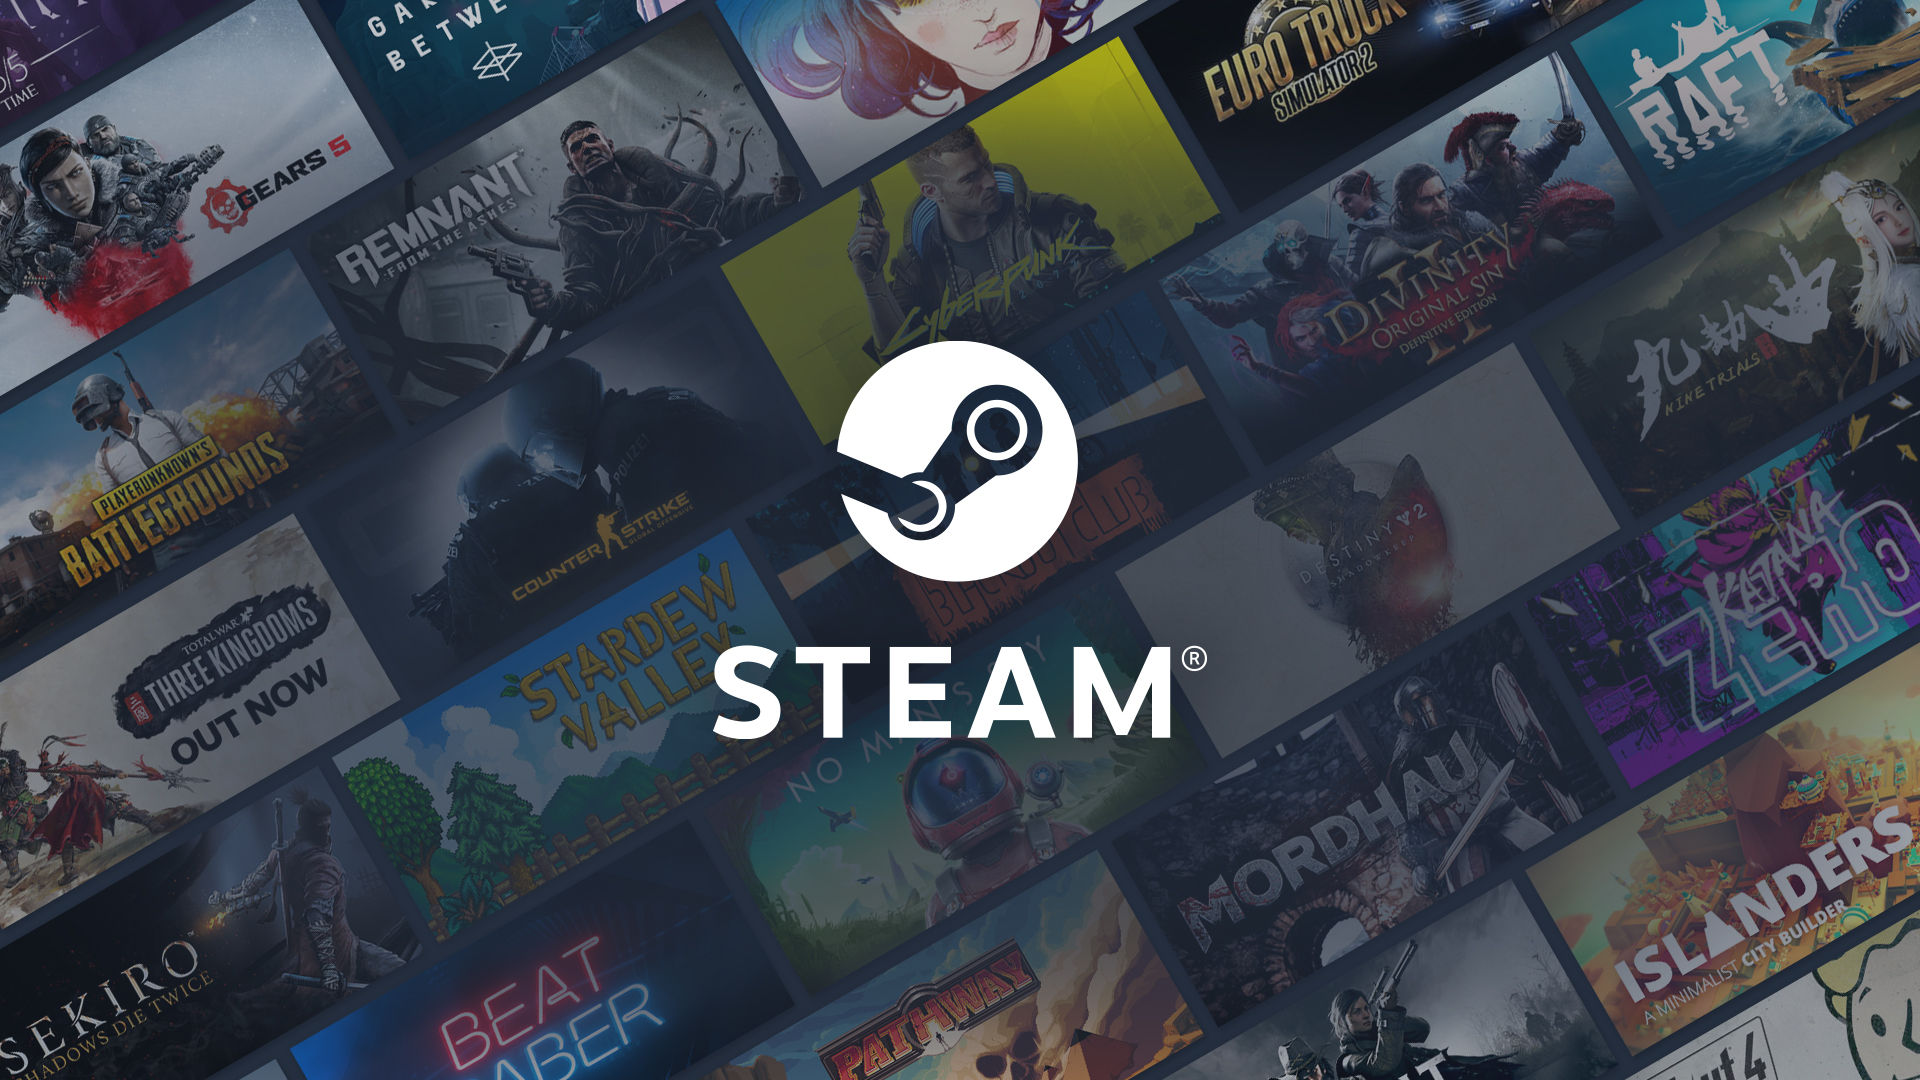 Steam Summer Sale 2020 deals: Up to 85% off PC games | Laptop Mag